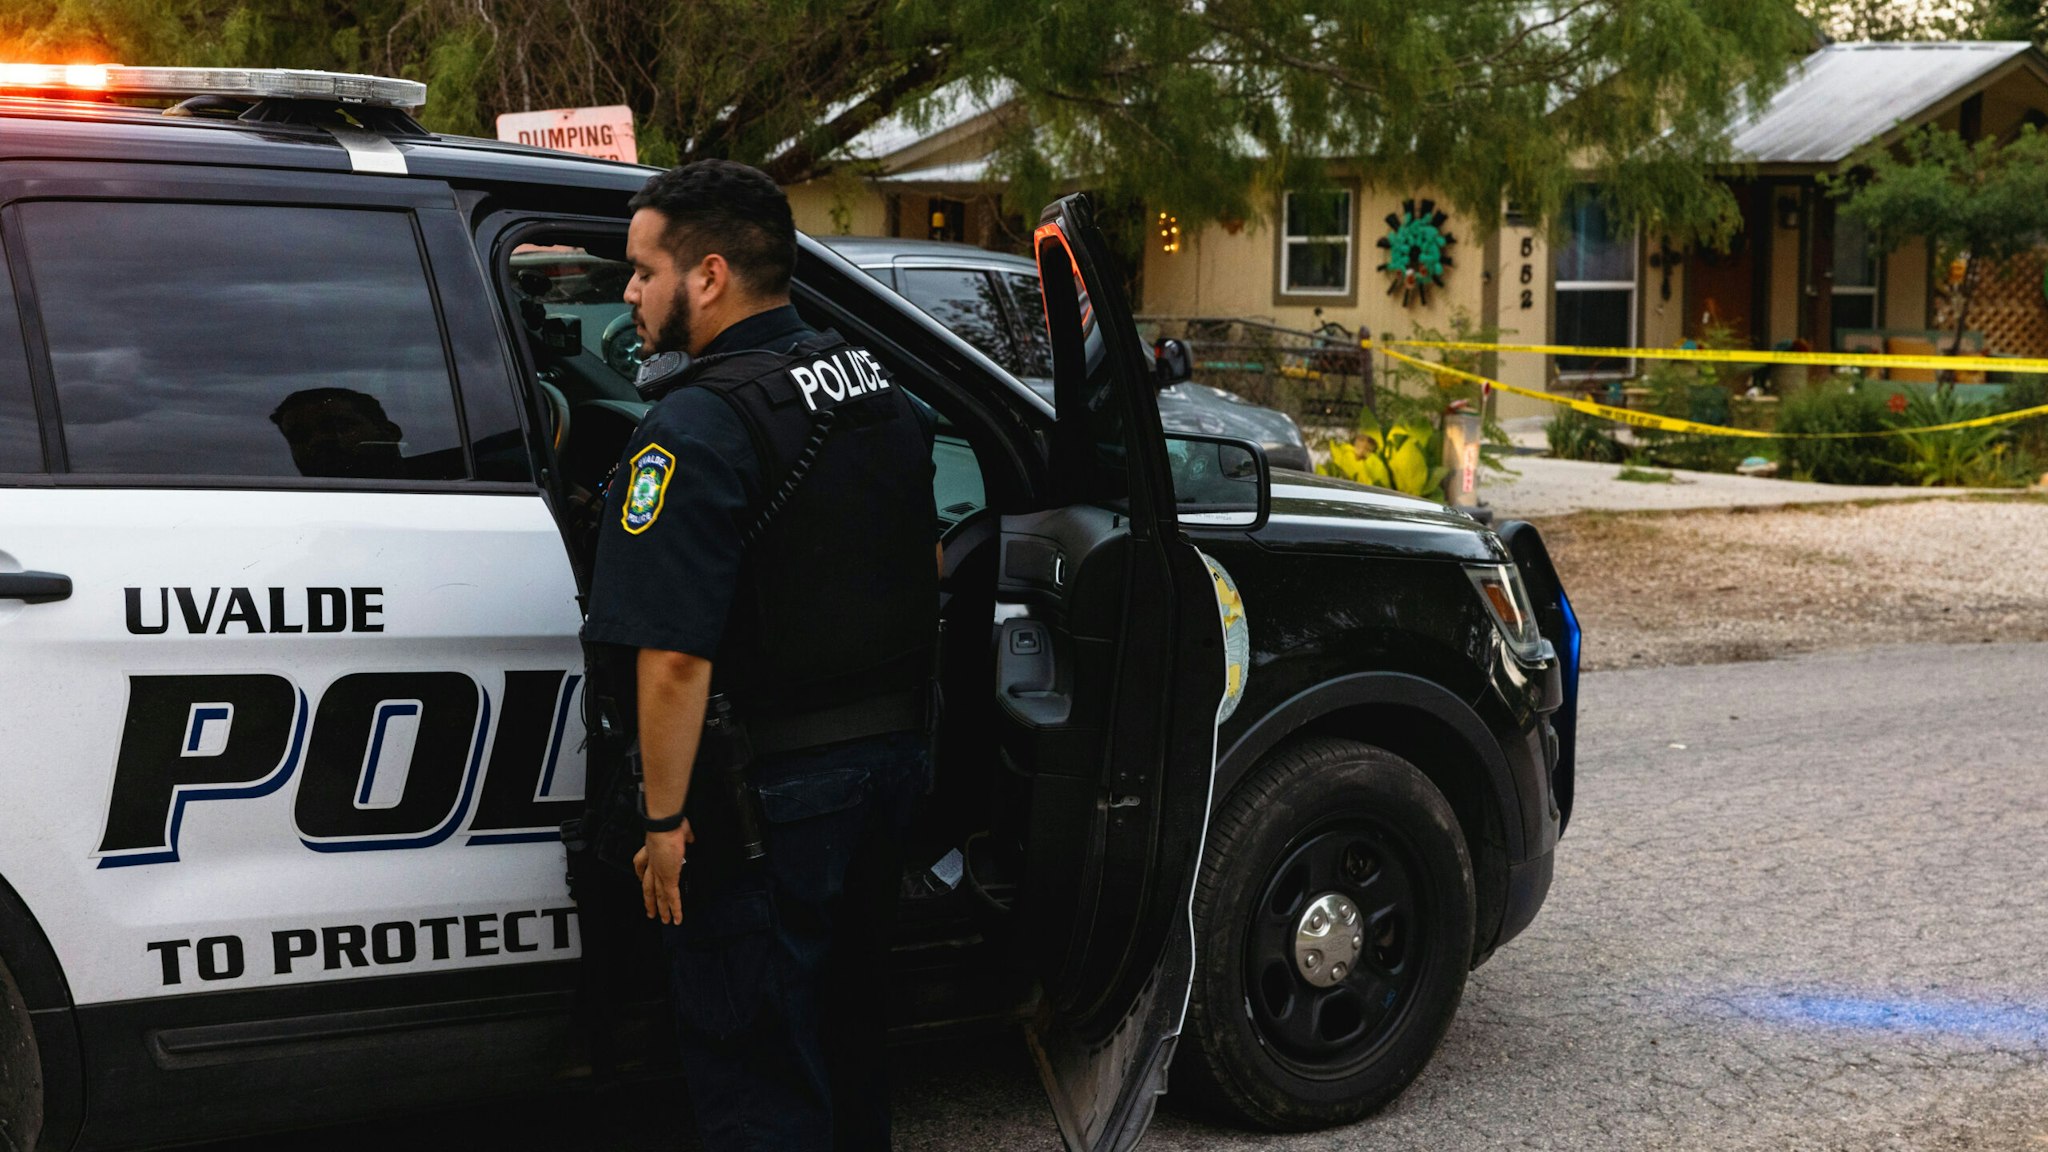 UVALDE, TX - MAY 24: Uvalde Police gather outside the home of suspected gunman 18-year-old Salvador Ramos on May 24, 2022 in Uvalde, Texas. According to reports, Ramos killed 19 students and 2 adults in a mass shooting at Robb Elementary School before being fatally shot by law enforcement.